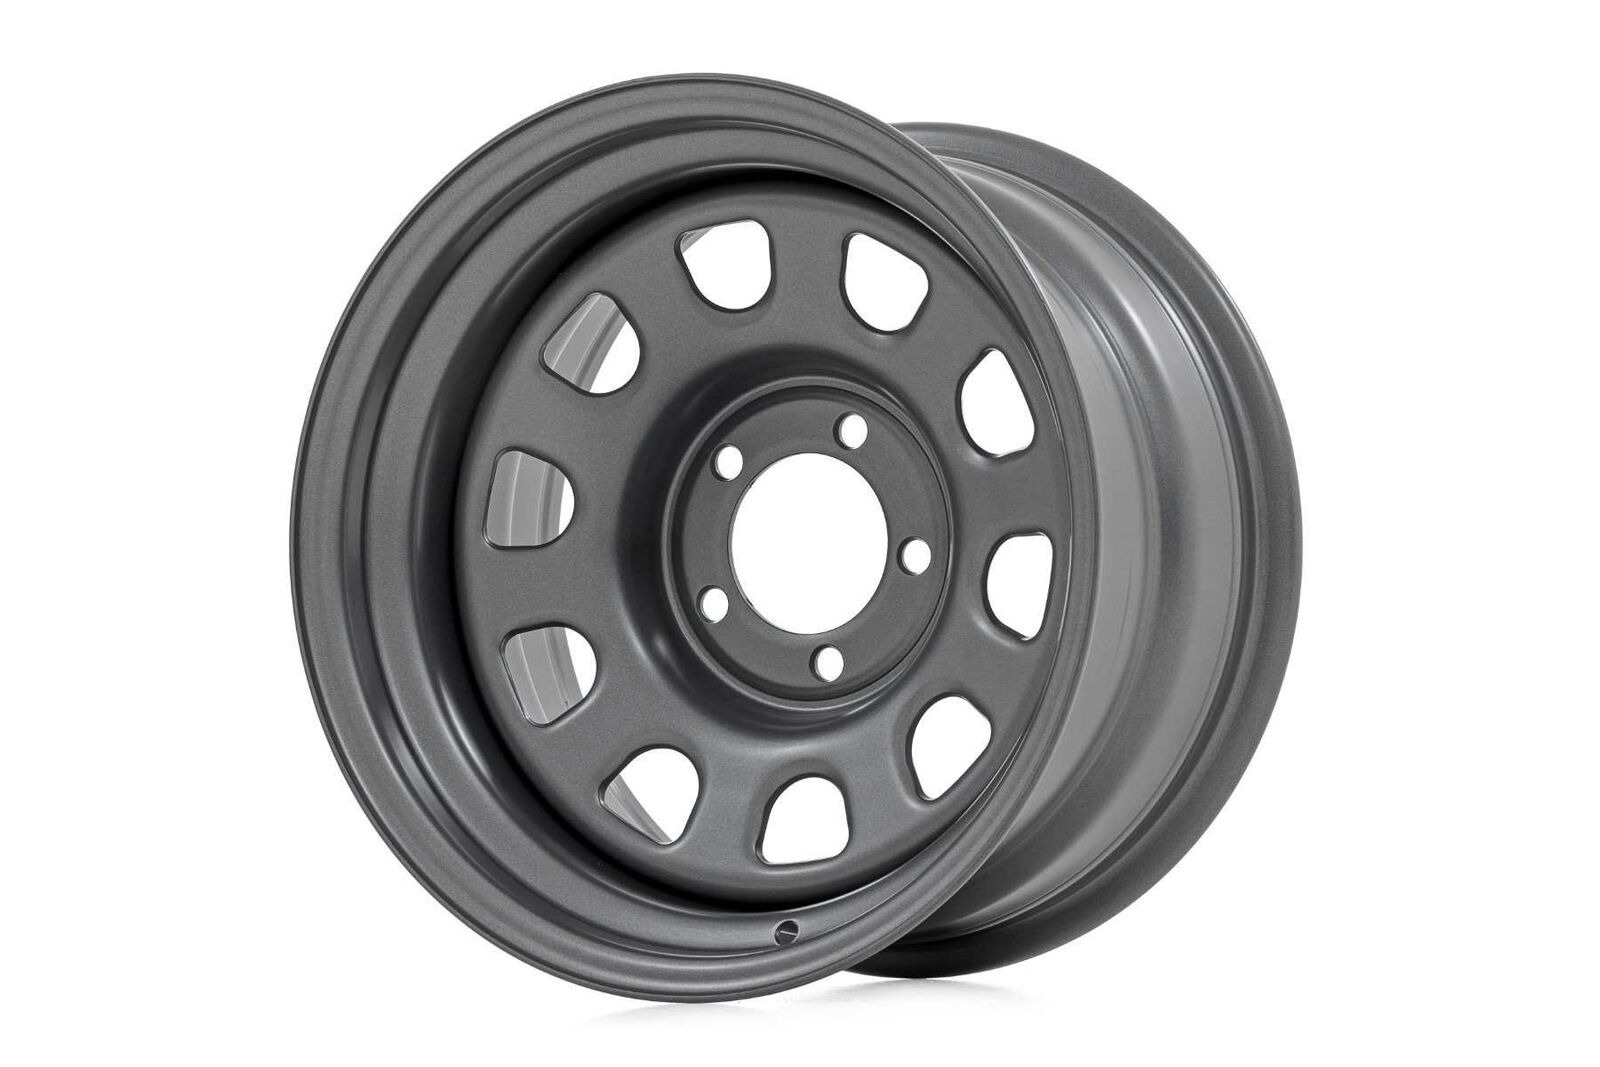 Rough Country Gray Steel Wheel | 16x8 | 6x5.5 | -12mm - RC51-6883G